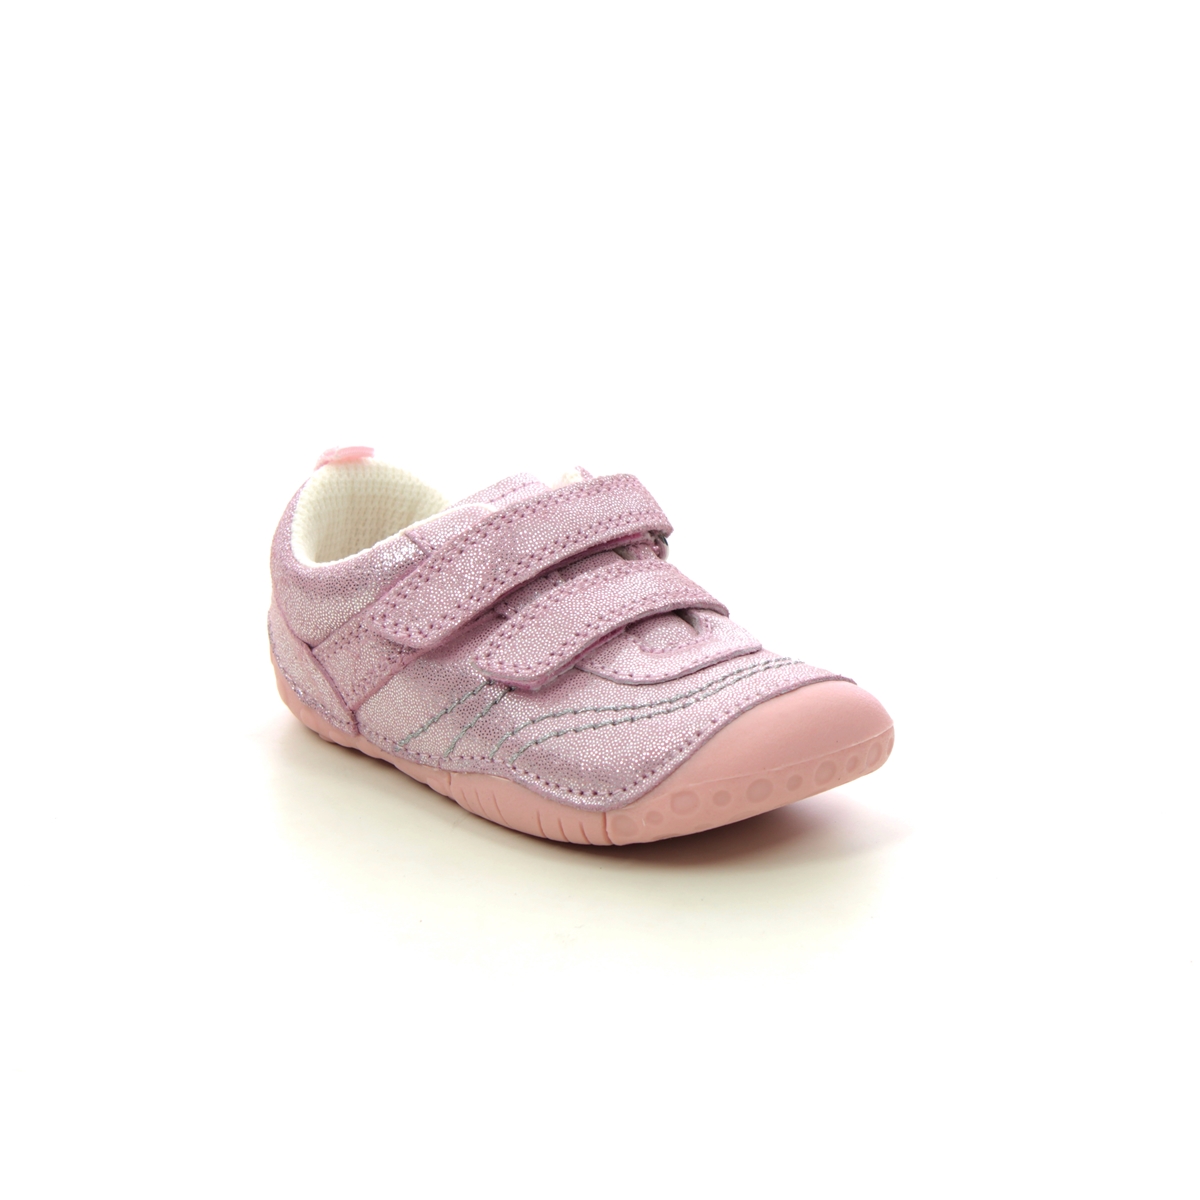 Start Rite - Little Smile 2V In Pink Glitter 0823-67G In Size 4.5 In Plain Pink Glitter First And Baby Shoes  In Pink Glitter For kids